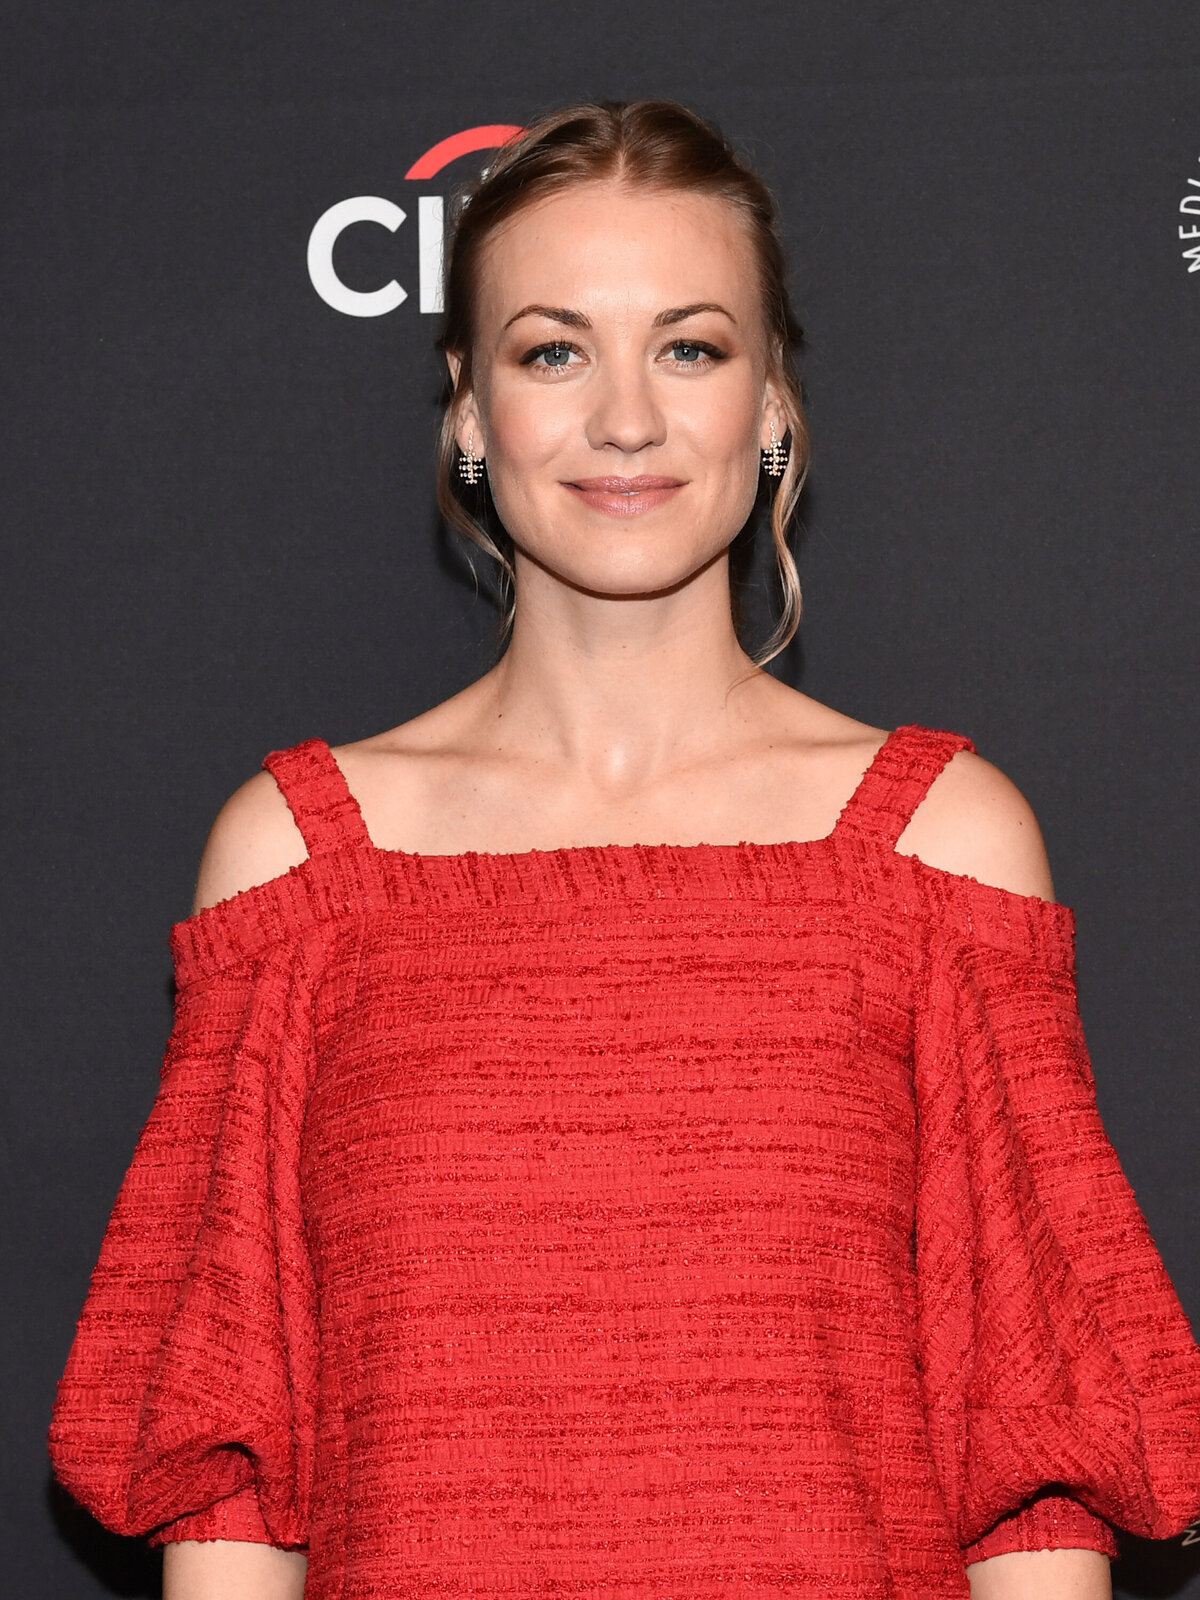 Yvonne Strahovski in a red dress and natural makeup